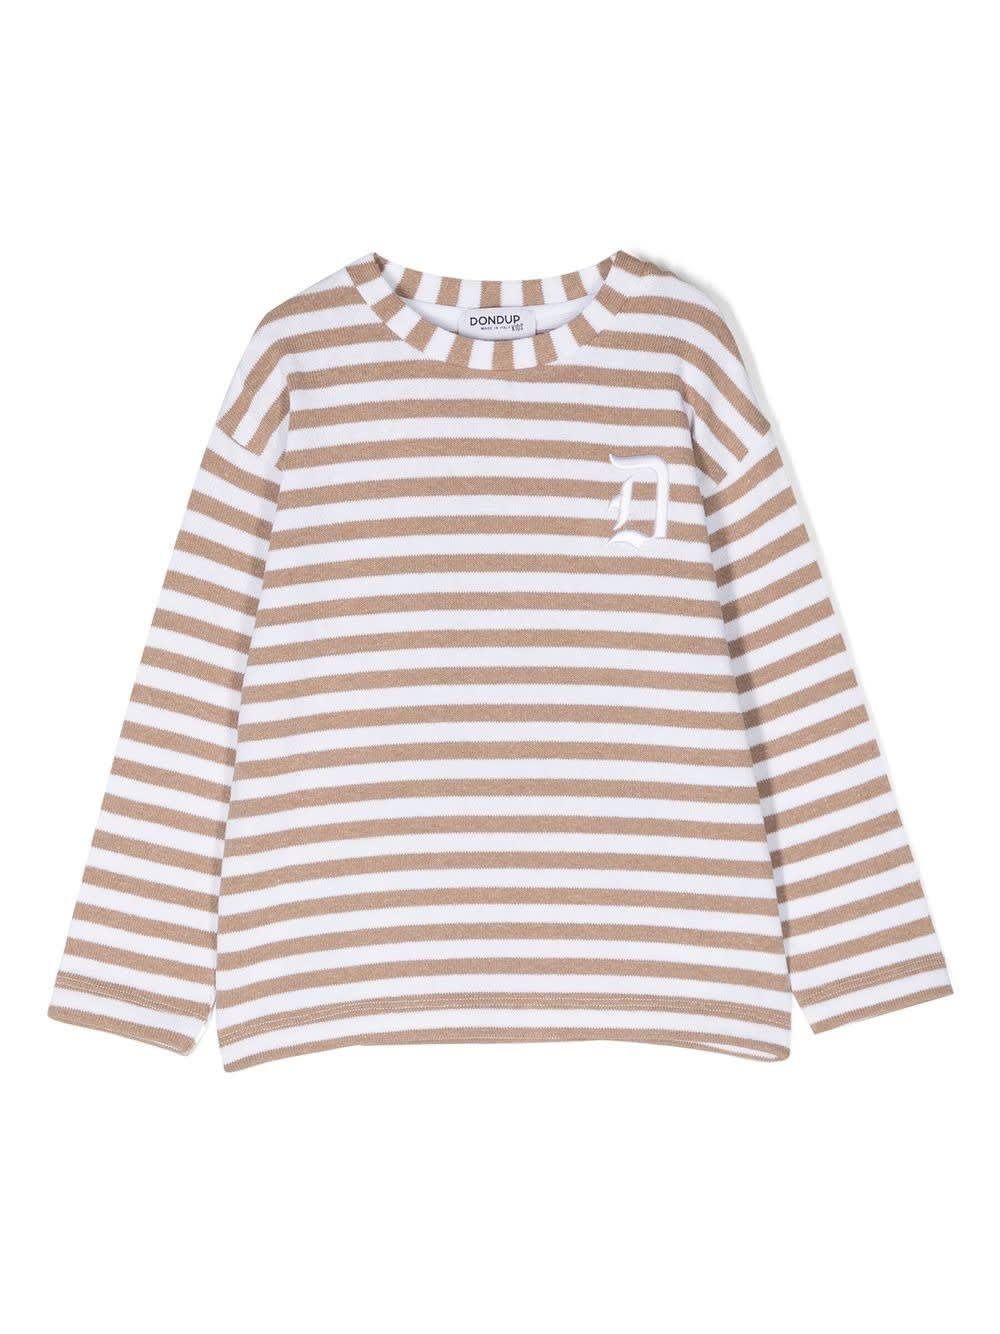 DONDUP BEIGE AND WHITE STRIPED PULLOVER WITH MONOGRAM